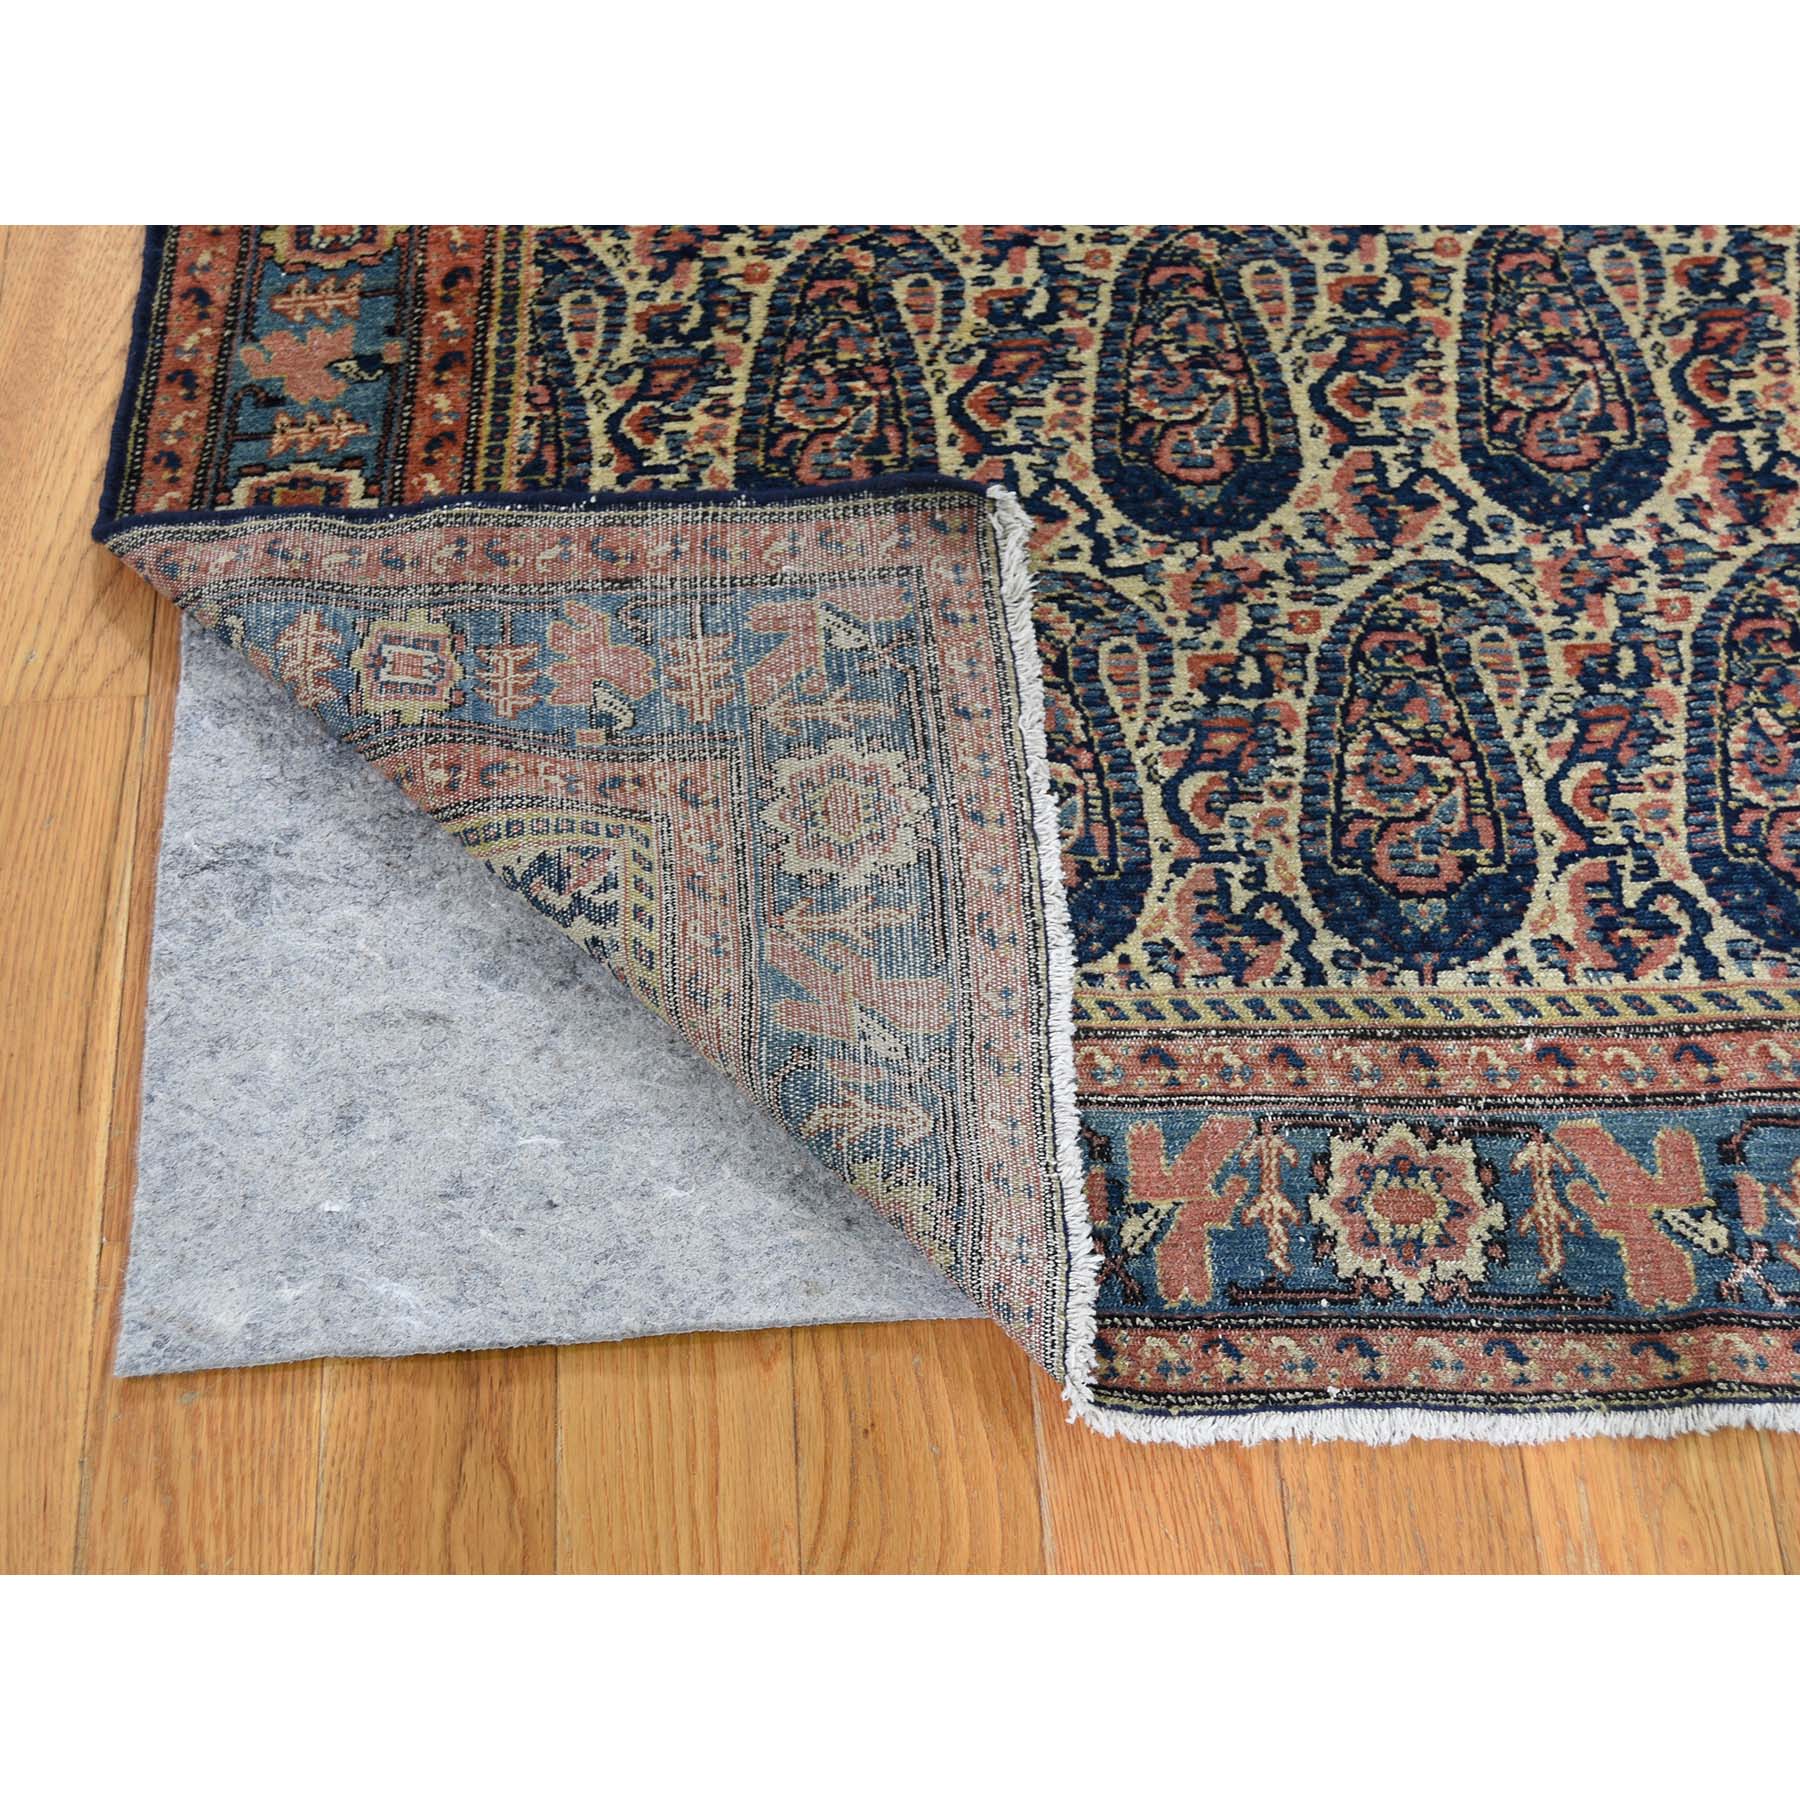 4-4 x6-4  Antique Persian Senneh paisley Design Exc Condition Hand-Knotted Oriental Rug 